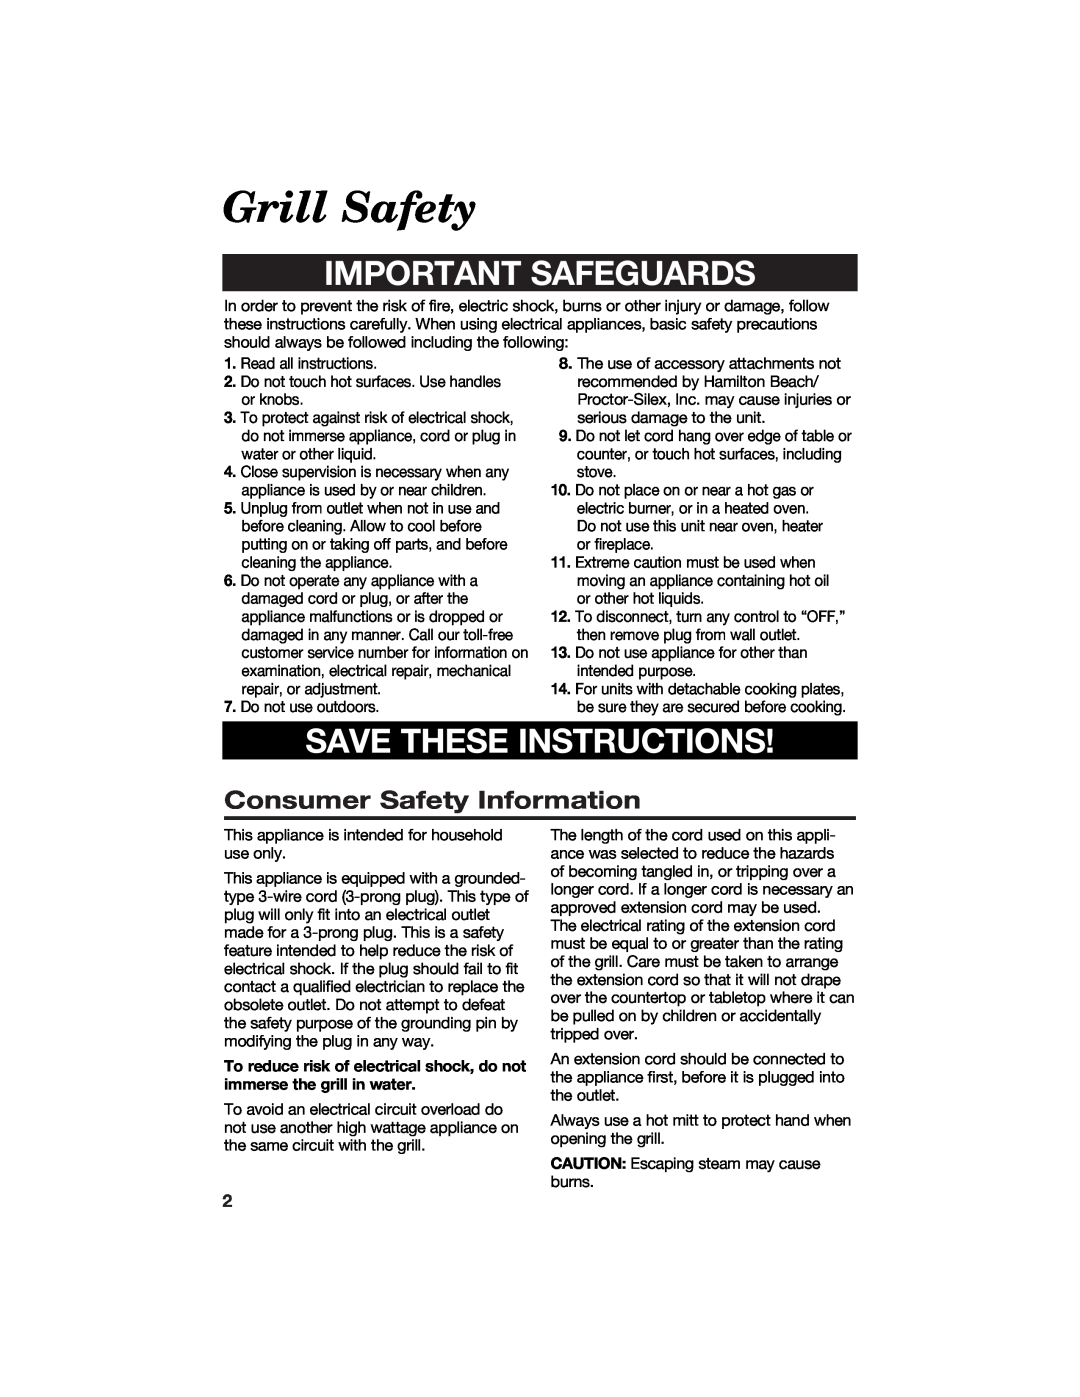 Hamilton Beach 840100500 manual Grill Safety, Consumer Safety Information, Important Safeguards, Save These Instructions 